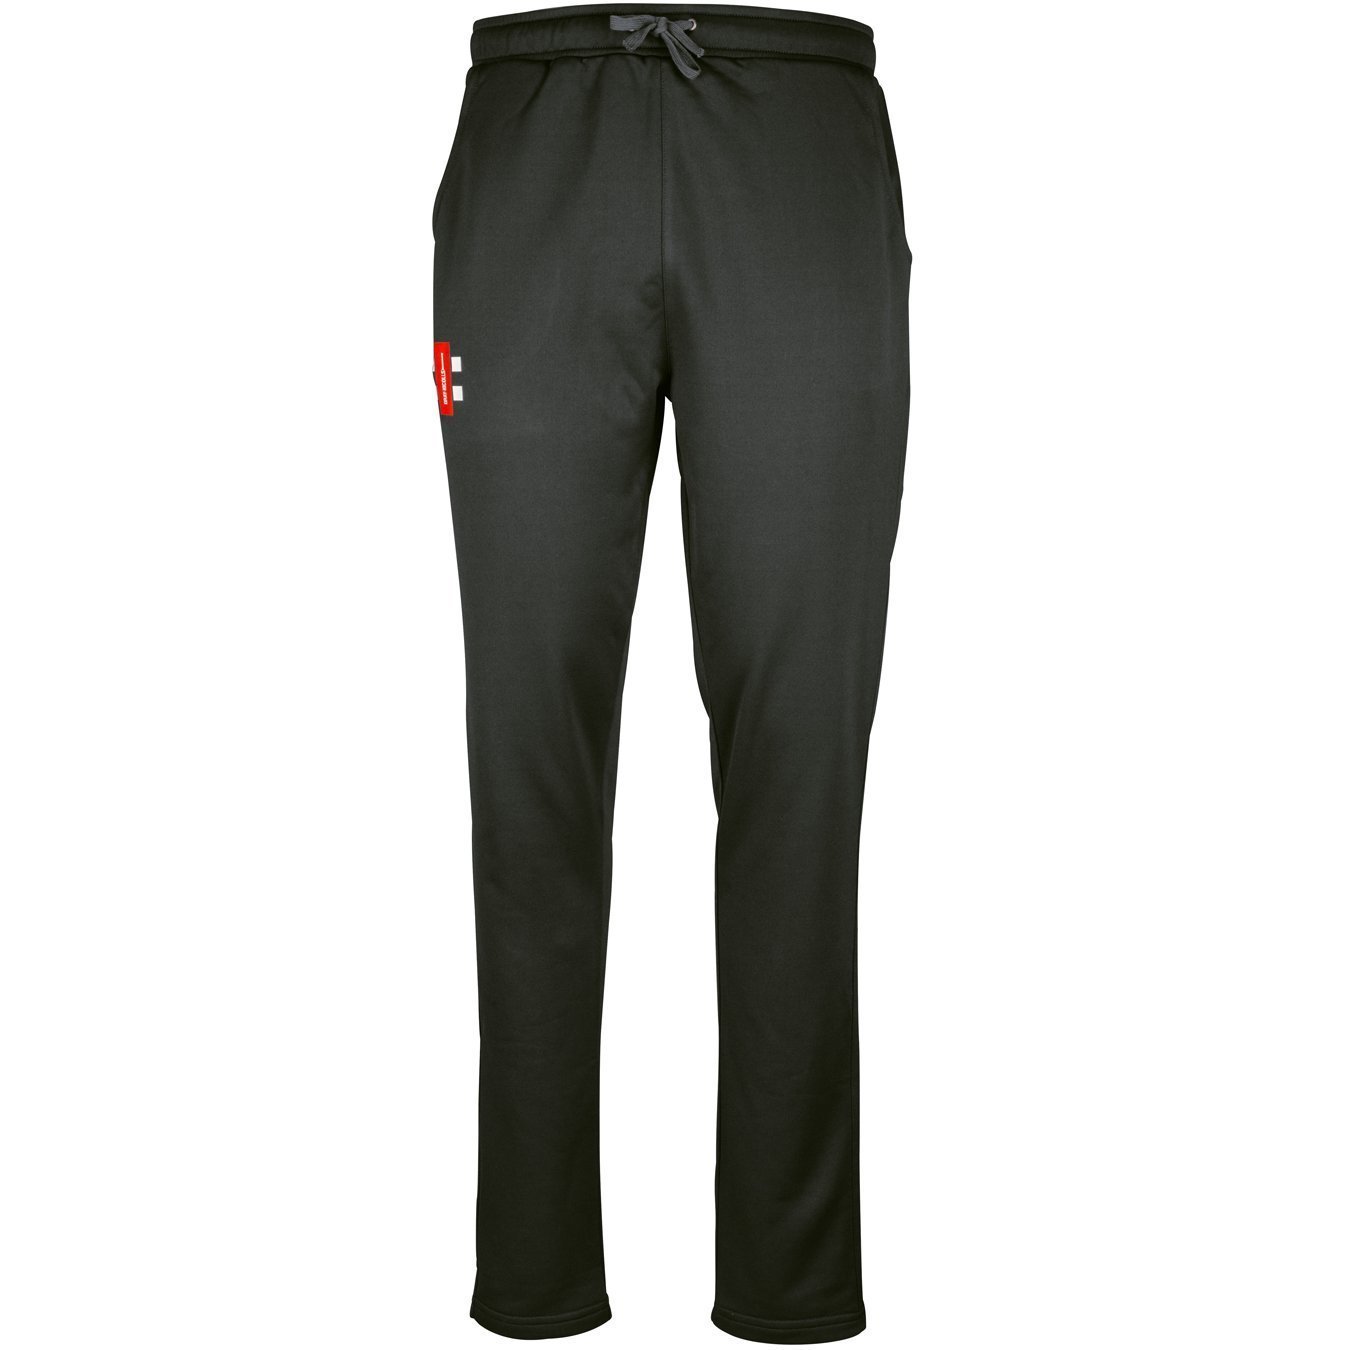 Kirby & Great Broughton Pro Performance Pant